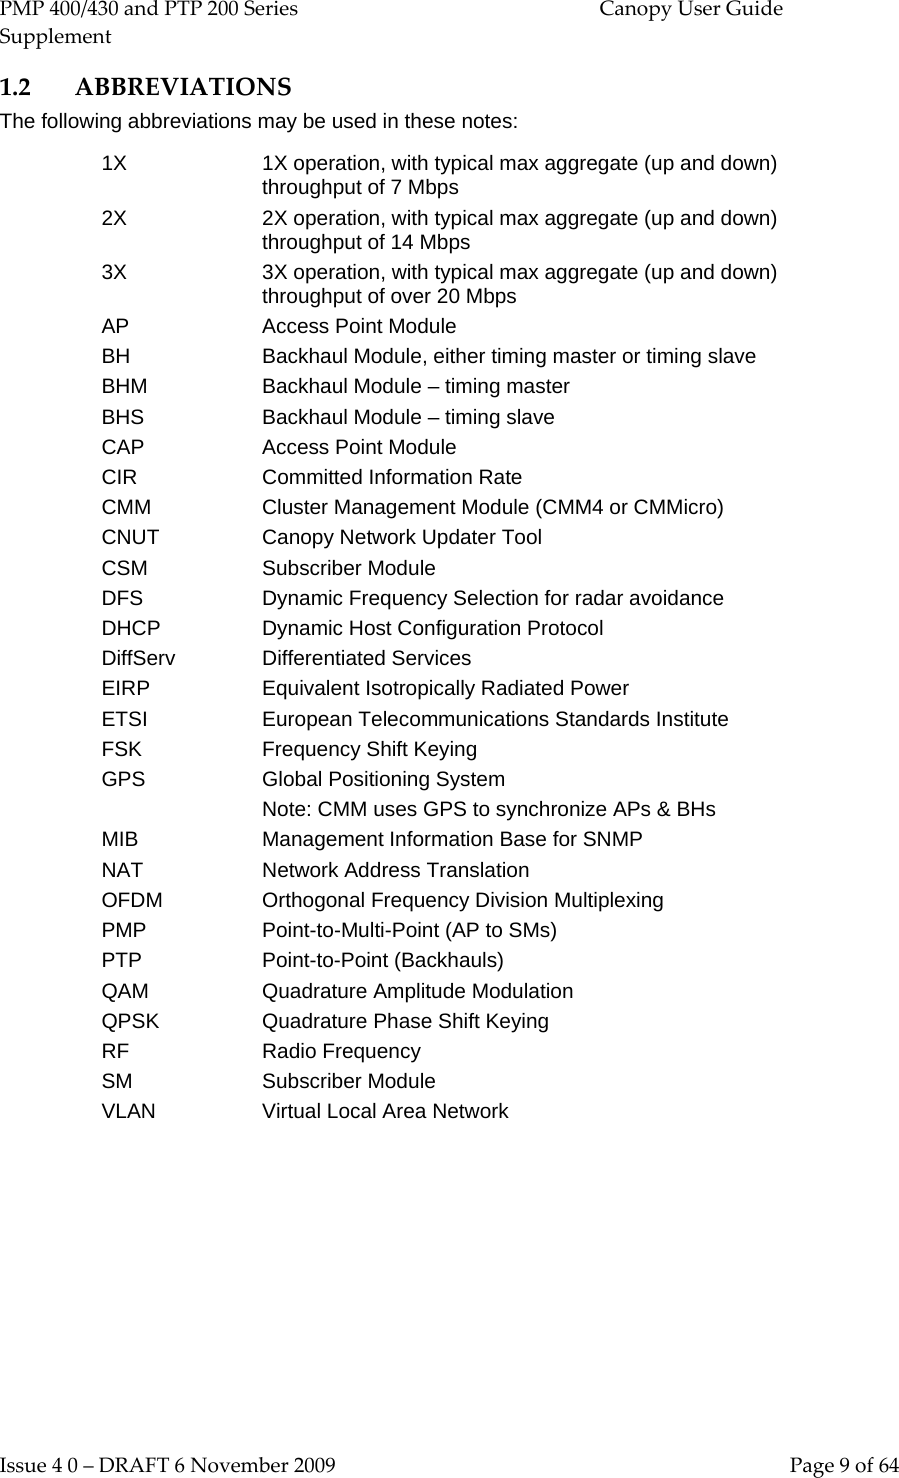 PMP 400/430 and PTP 200 Series  Canopy User Guide Supplement Issue 4 0 – DRAFT 6 November 2009    Page 9 of 64 1.2 ABBREVIATIONS The following abbreviations may be used in these notes: 1X 1X operation, with typical max aggregate (up and down) throughput of 7 Mbps 2X 2X operation, with typical max aggregate (up and down) throughput of 14 Mbps 3X 3X operation, with typical max aggregate (up and down) throughput of over 20 Mbps AP Access Point Module BH Backhaul Module, either timing master or timing slave BHM Backhaul Module – timing master BHS CAP CIR Backhaul Module – timing slave Access Point Module Committed Information Rate CMM Cluster Management Module (CMM4 or CMMicro) CNUT CSM Canopy Network Updater Tool Subscriber Module DFS DHCP DiffServ Dynamic Frequency Selection for radar avoidance Dynamic Host Configuration Protocol Differentiated Services EIRP Equivalent Isotropically Radiated Power ETSI European Telecommunications Standards Institute FSK GPS Frequency Shift Keying Global Positioning System Note: CMM uses GPS to synchronize APs &amp; BHs MIB NAT Management Information Base for SNMP Network Address Translation OFDM Orthogonal Frequency Division Multiplexing PMP PTP Point-to-Multi-Point (AP to SMs) Point-to-Point (Backhauls) QAM Quadrature Amplitude Modulation QPSK Quadrature Phase Shift Keying RF Radio Frequency SM VLAN Subscriber Module Virtual Local Area Network       